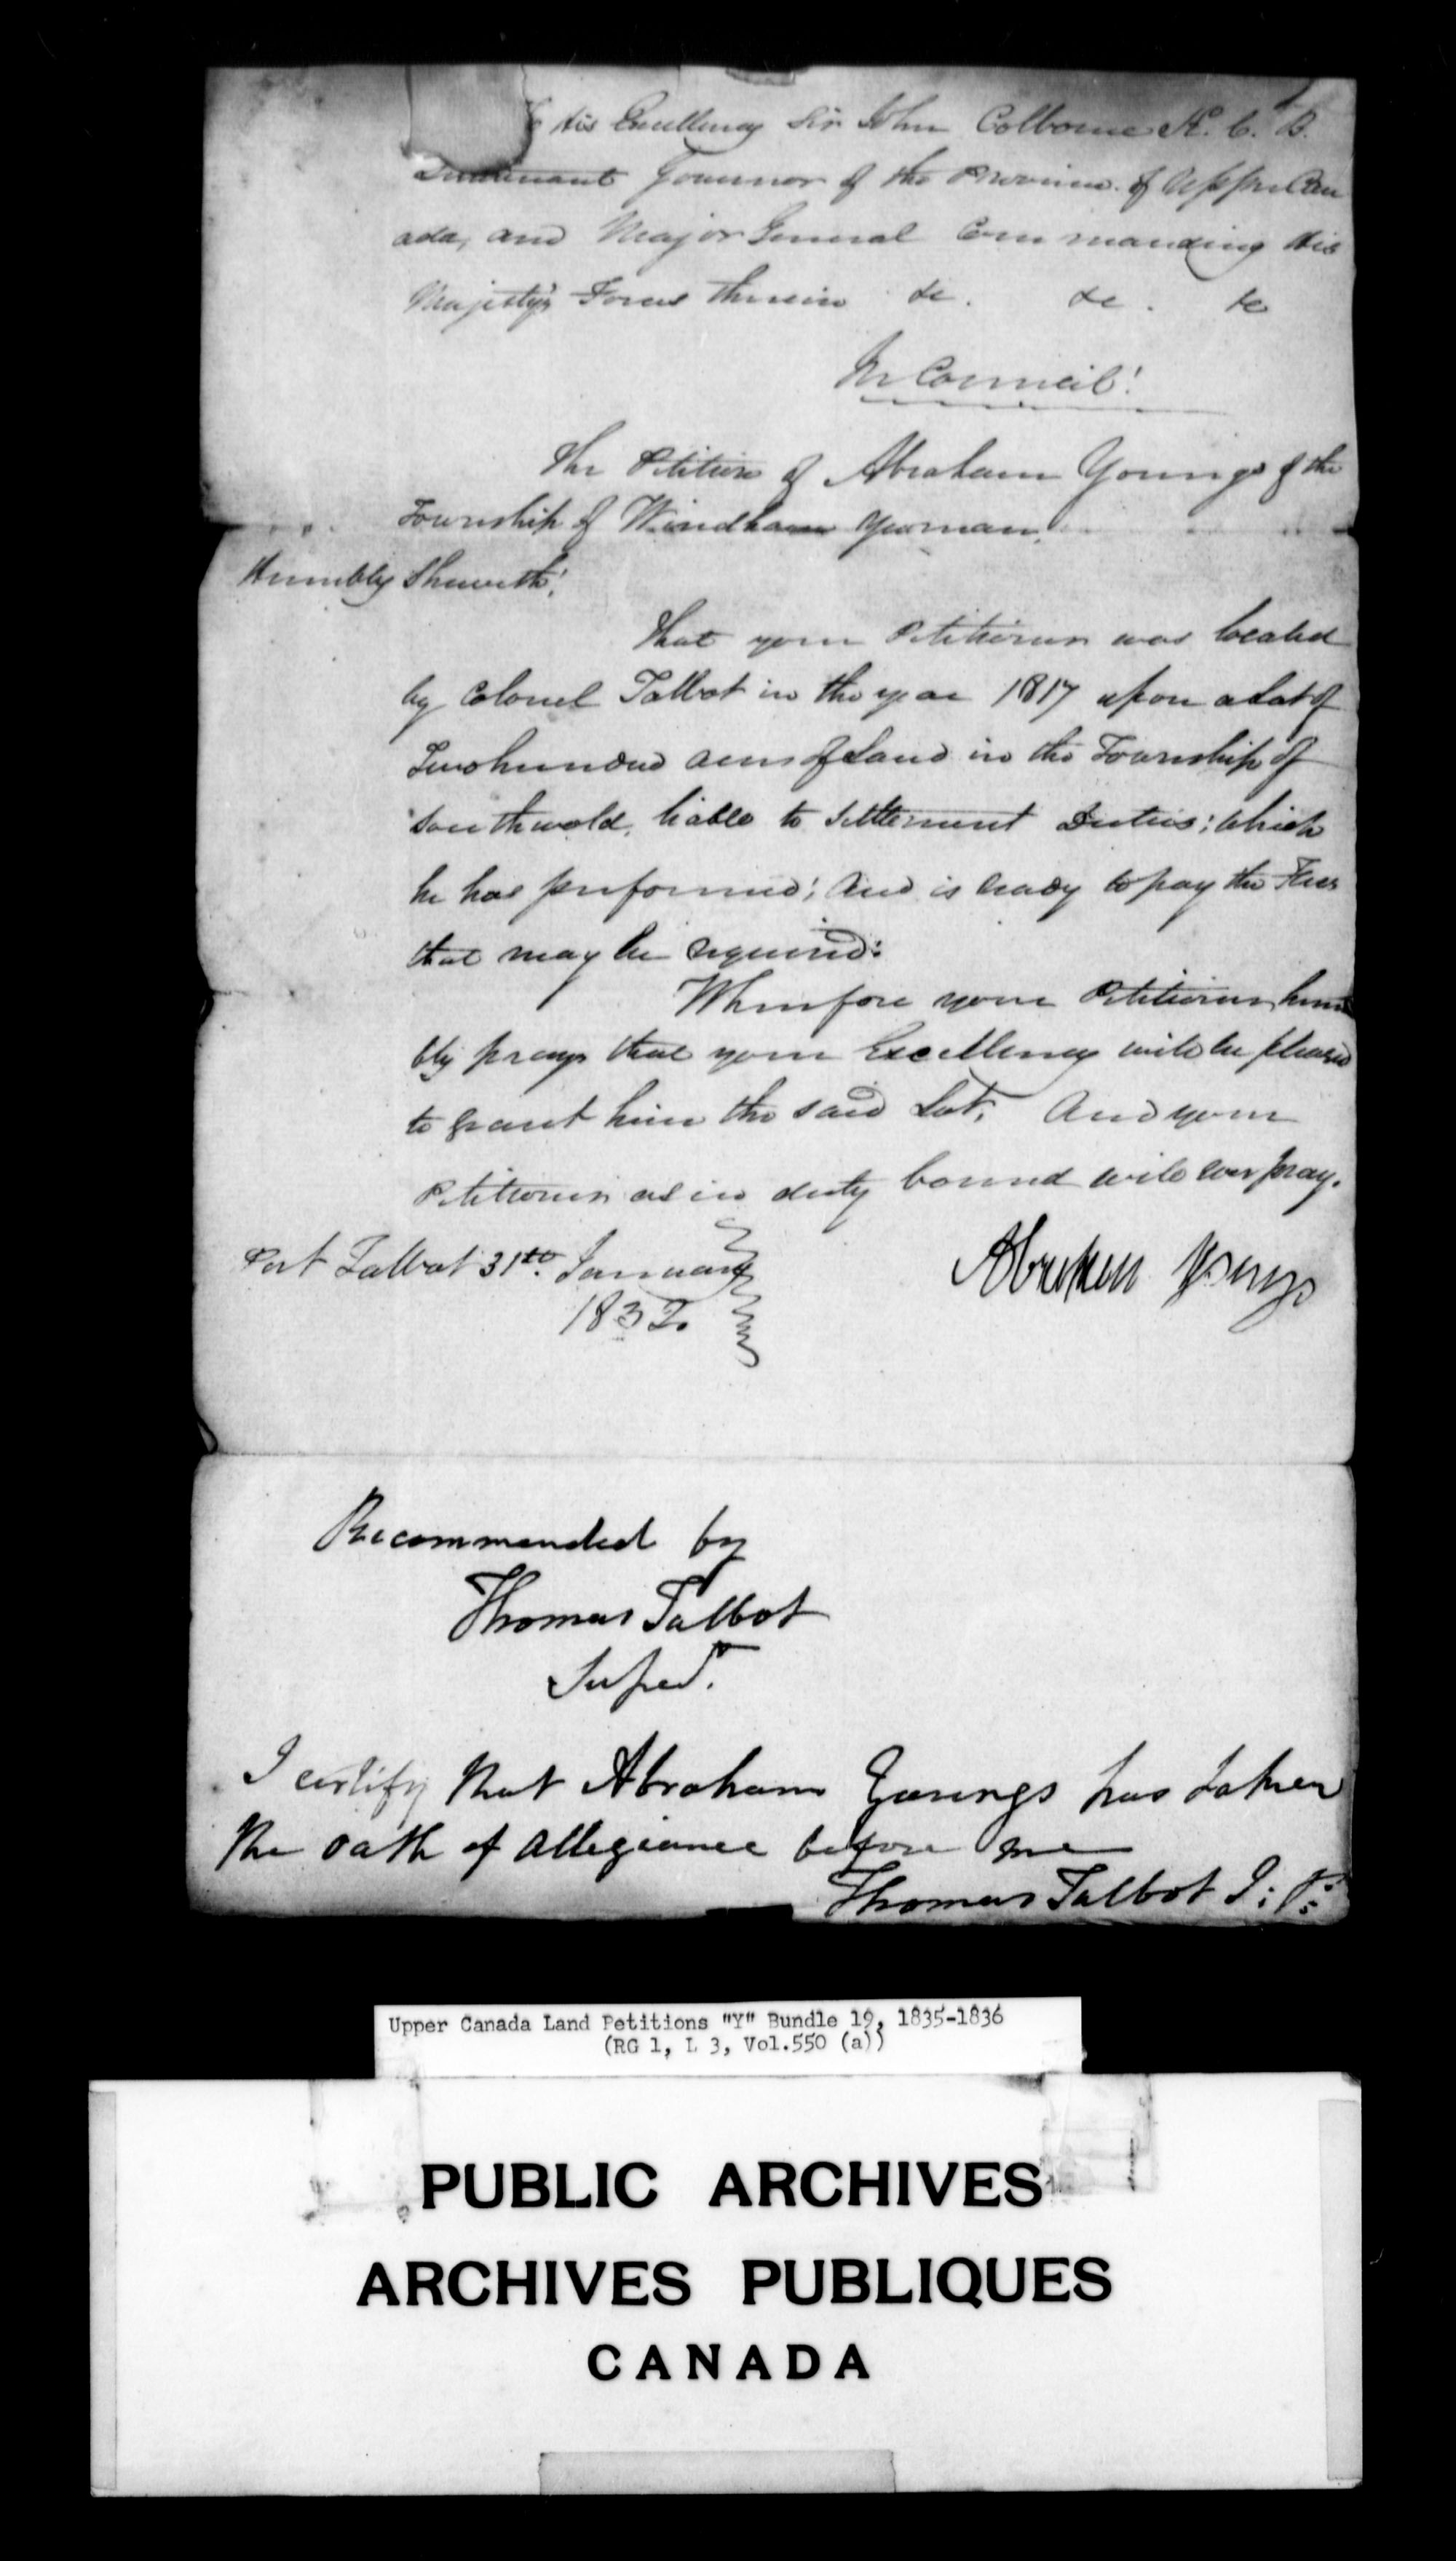 Title: Upper Canada Land Petitions (1763-1865) - Mikan Number: 205131 - Microform: c-2981